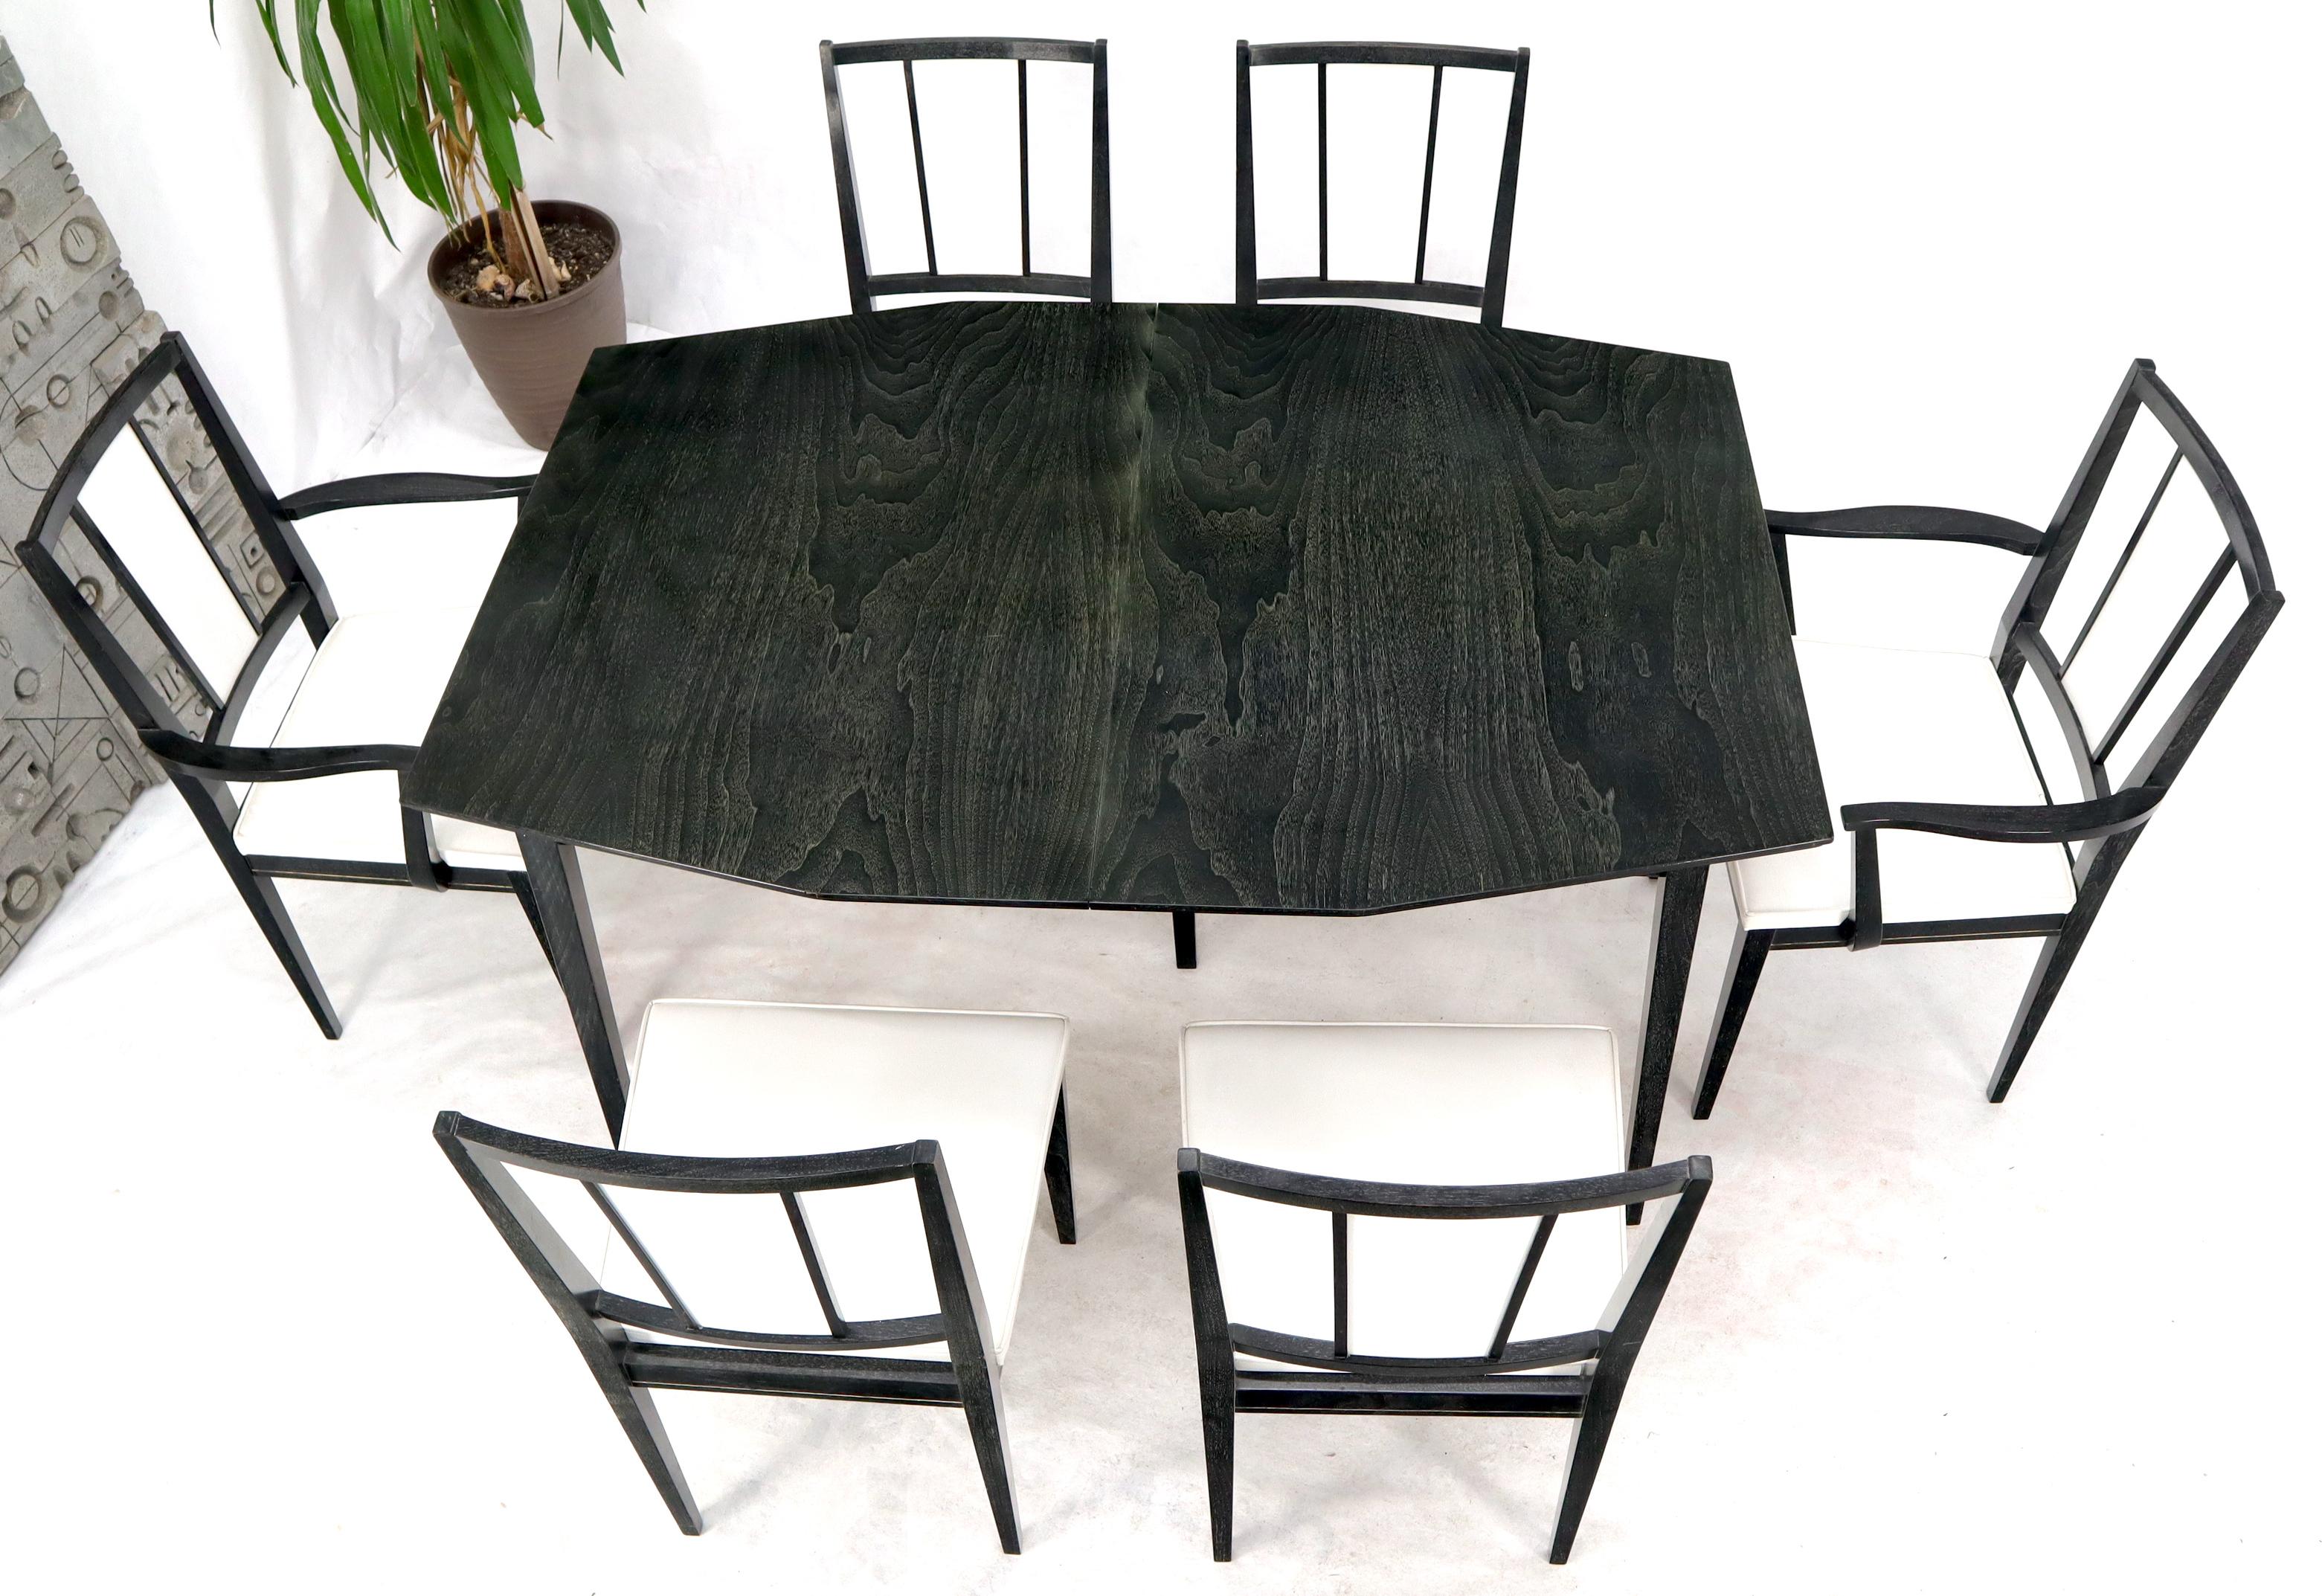 Cerused Ebonized Walnut Dining Room Table 6 Chairs Set w/ Two Extension Boards In Good Condition For Sale In Rockaway, NJ